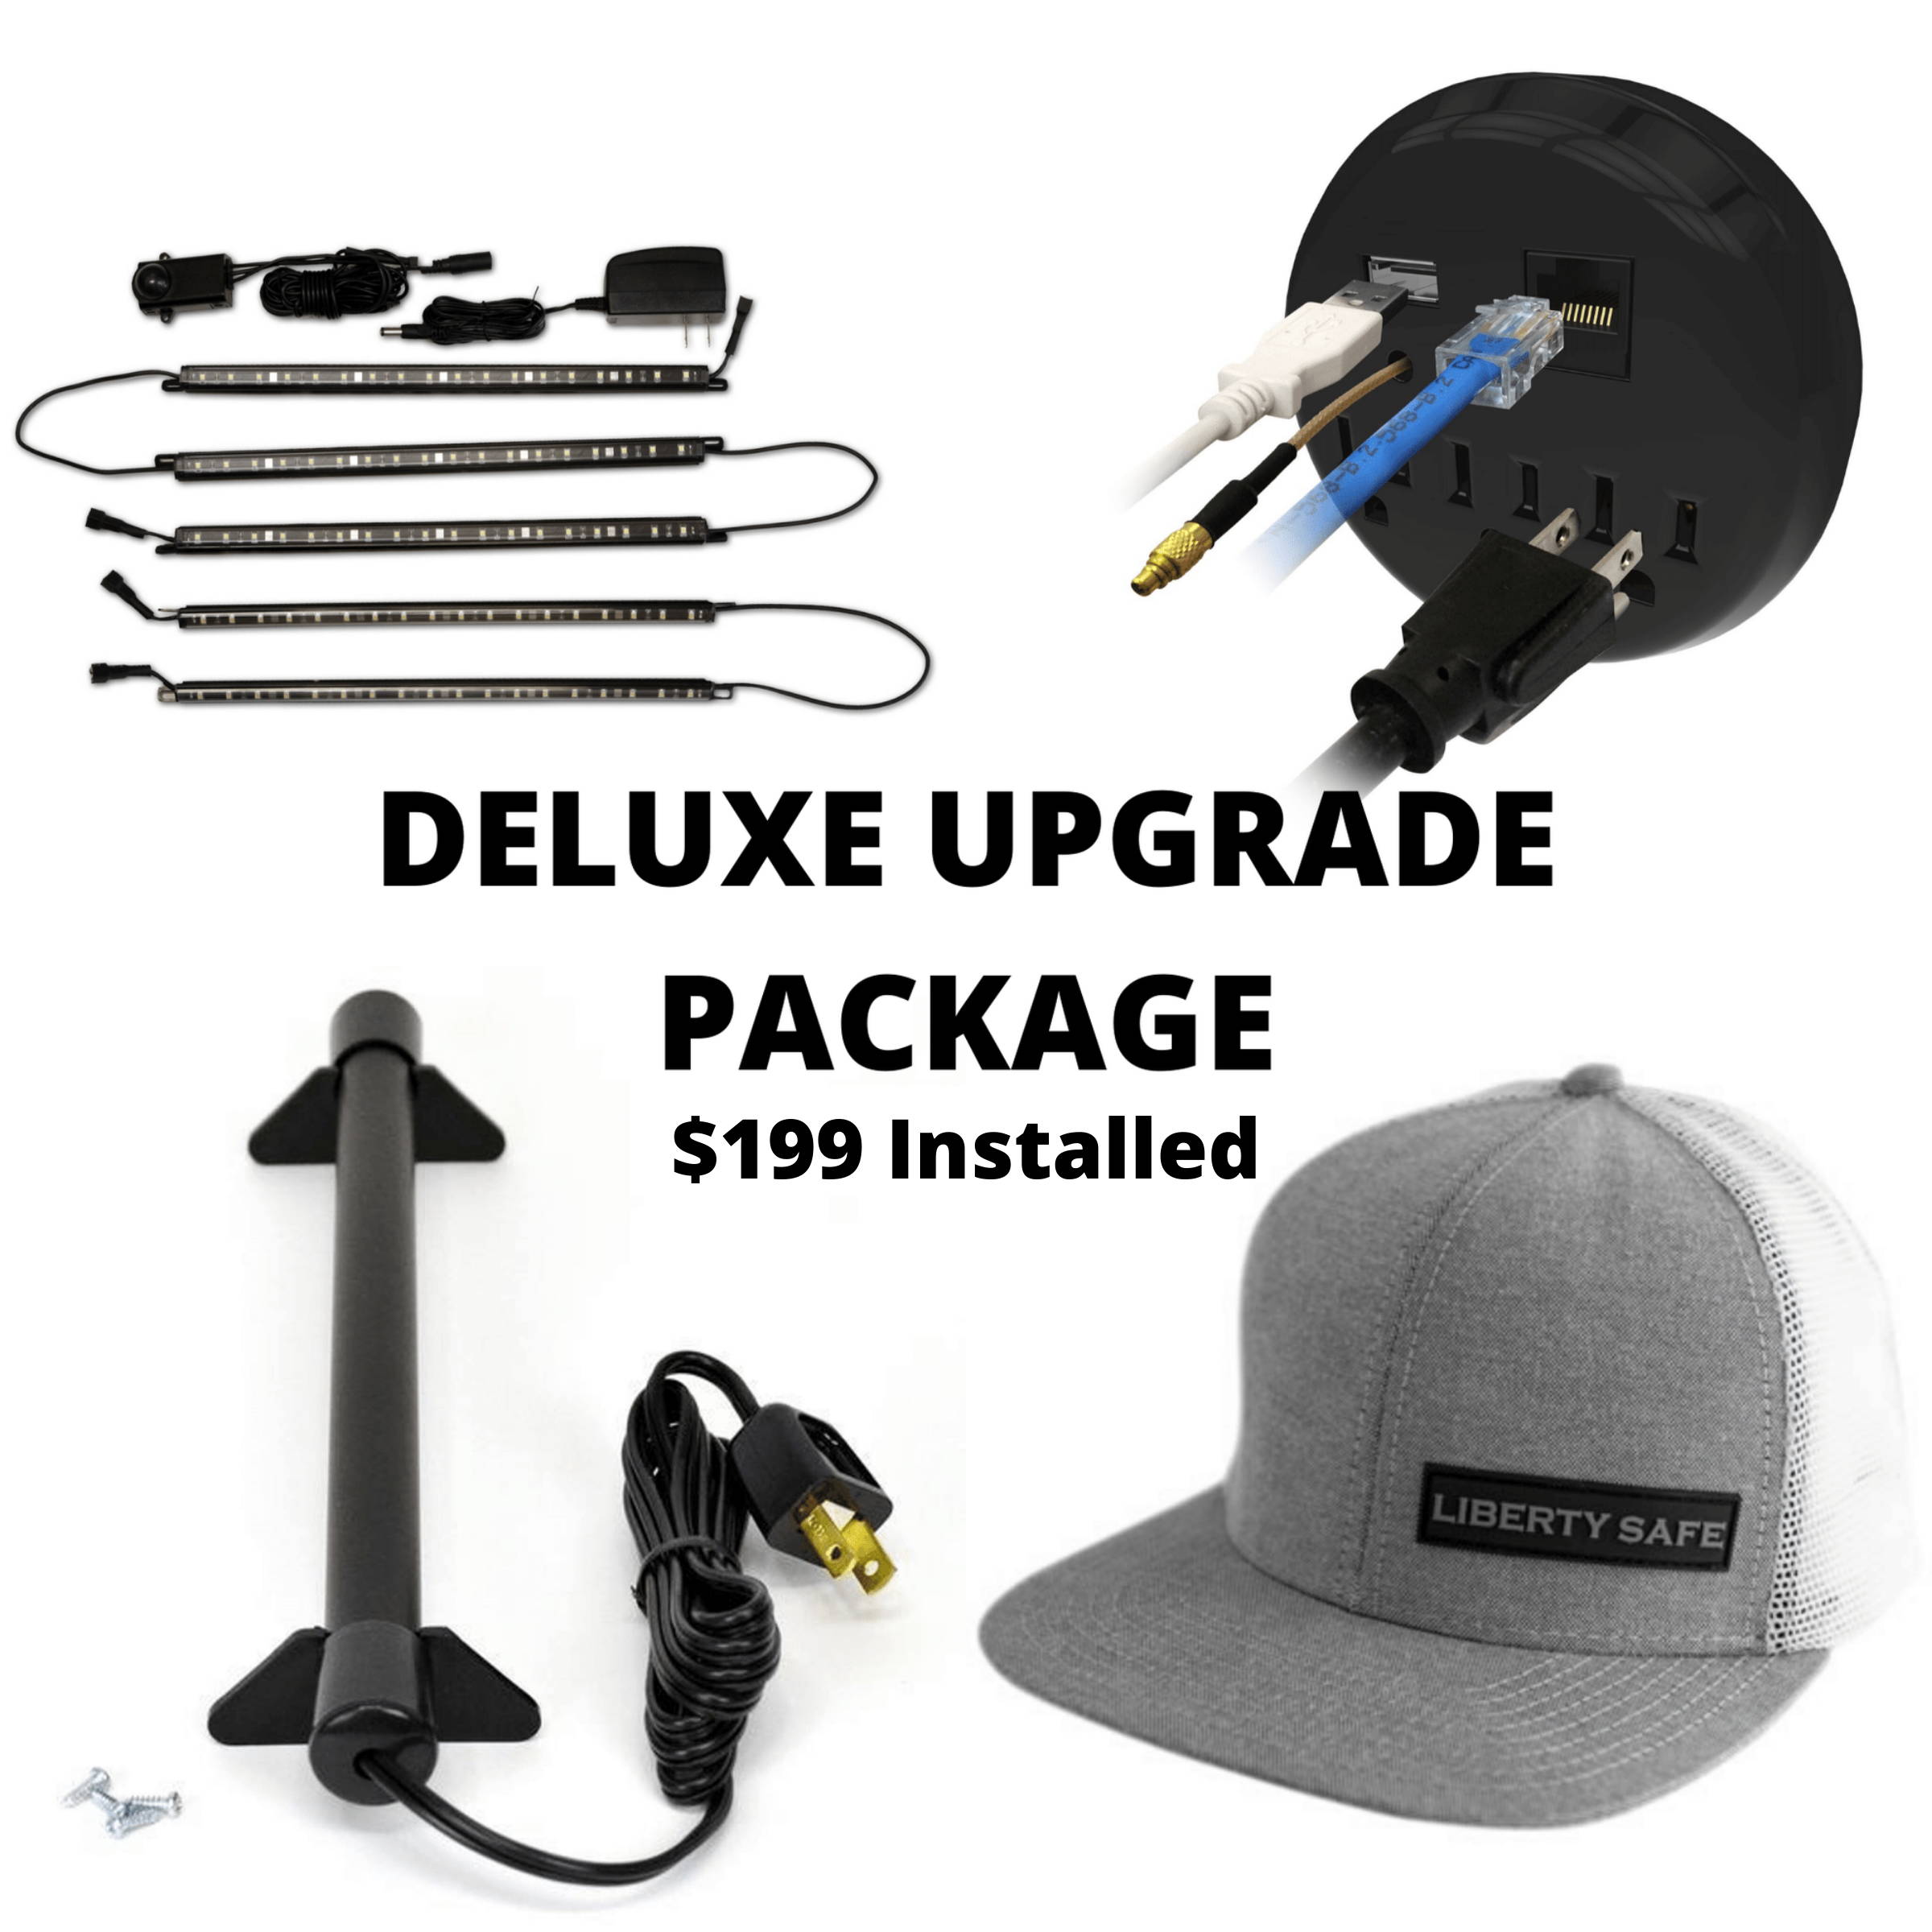 Deluxe Upgrade Package $199 Installed